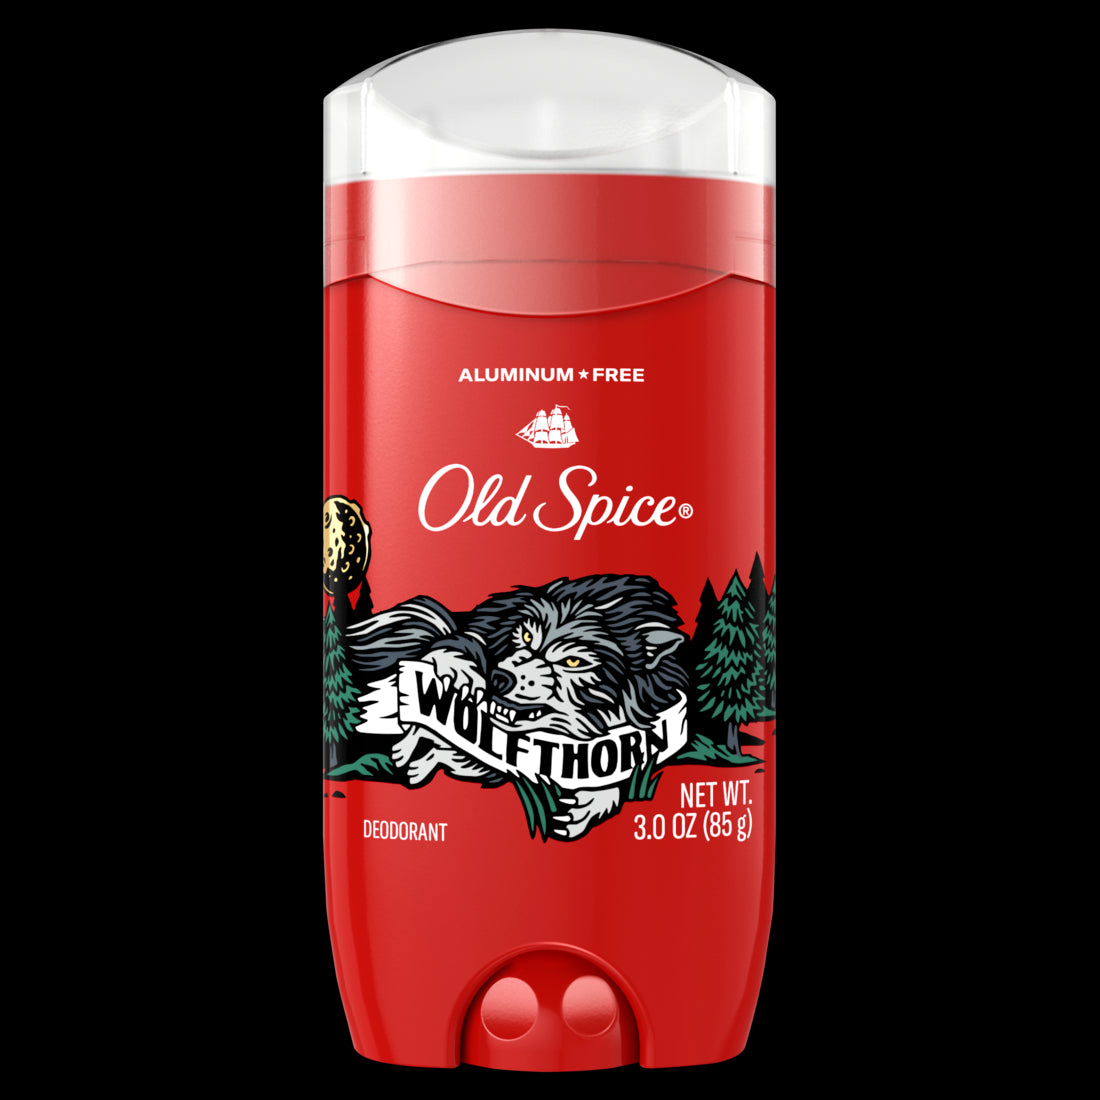 Old Spice Aluminum Free Deodorant for Men Wolfthorn 48hr Protection - 3oz/12pk